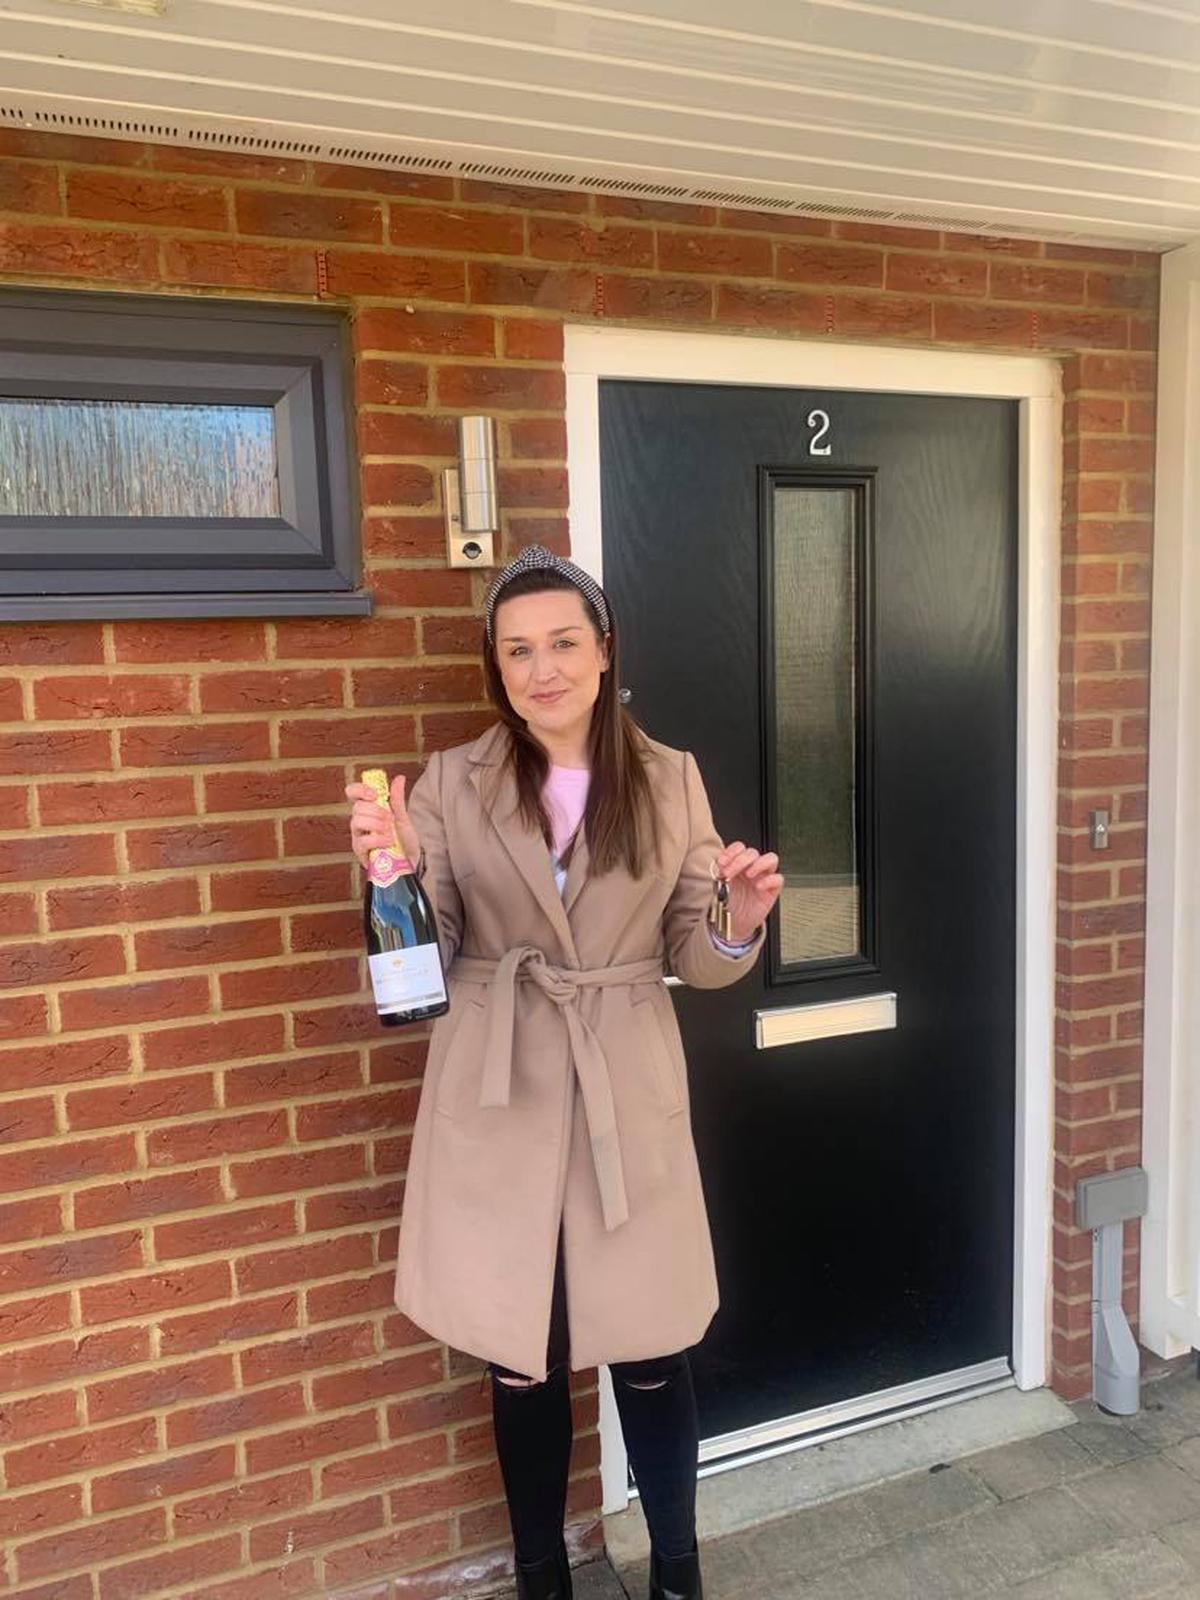 Louise outside their home the day they got the keys. (Caters News)